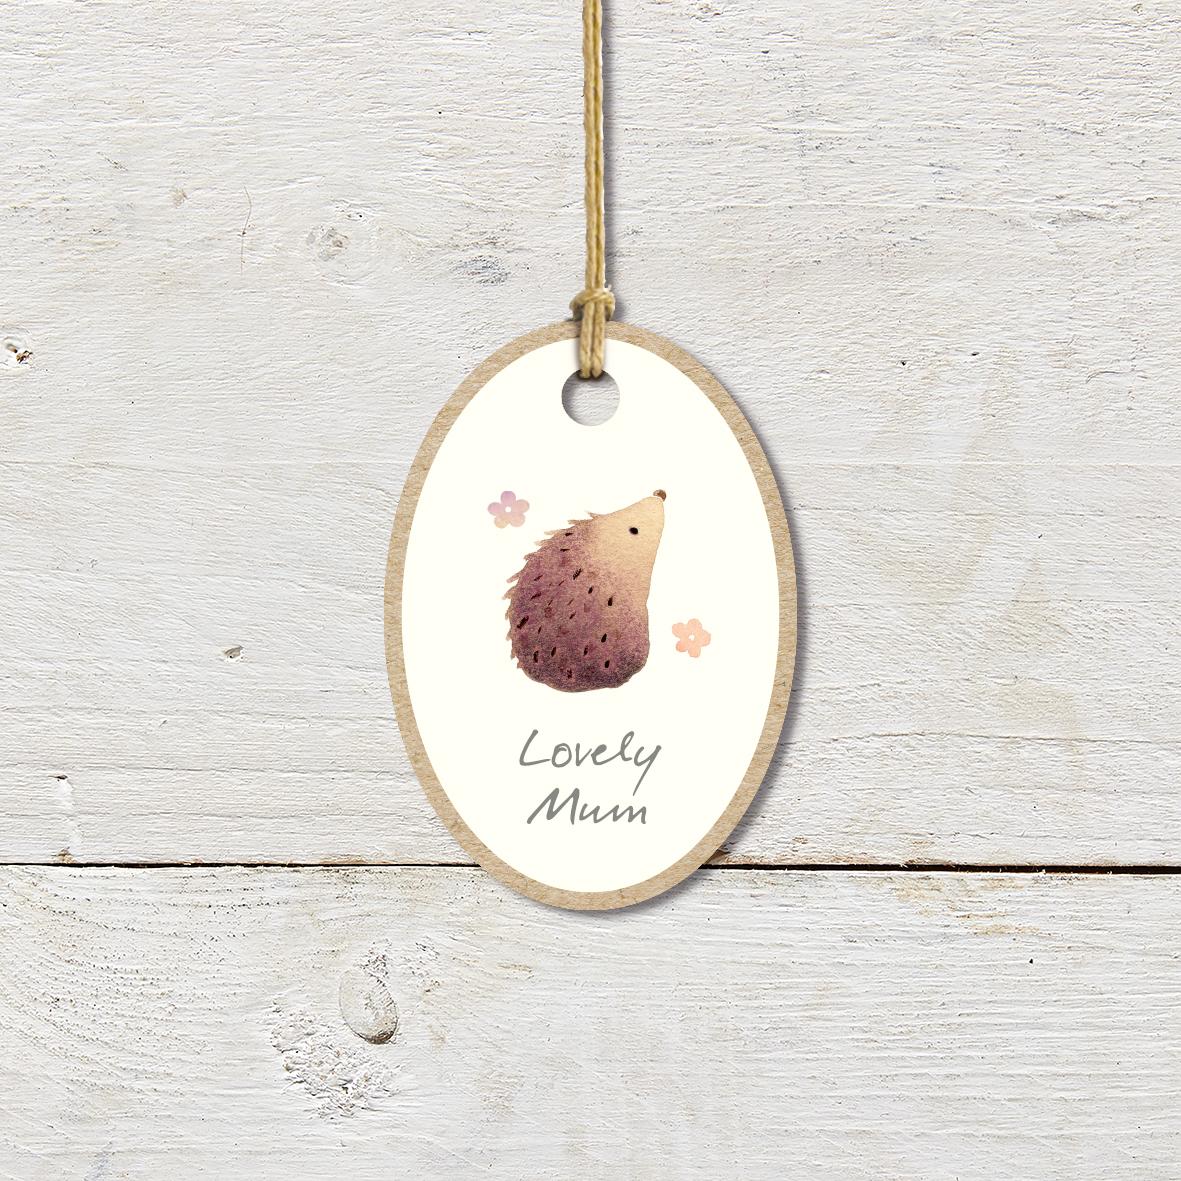 Small Wooden Keepsake Plaque/Tag featuring a cute hedgehog with a ’Lovely Mum’ caption.